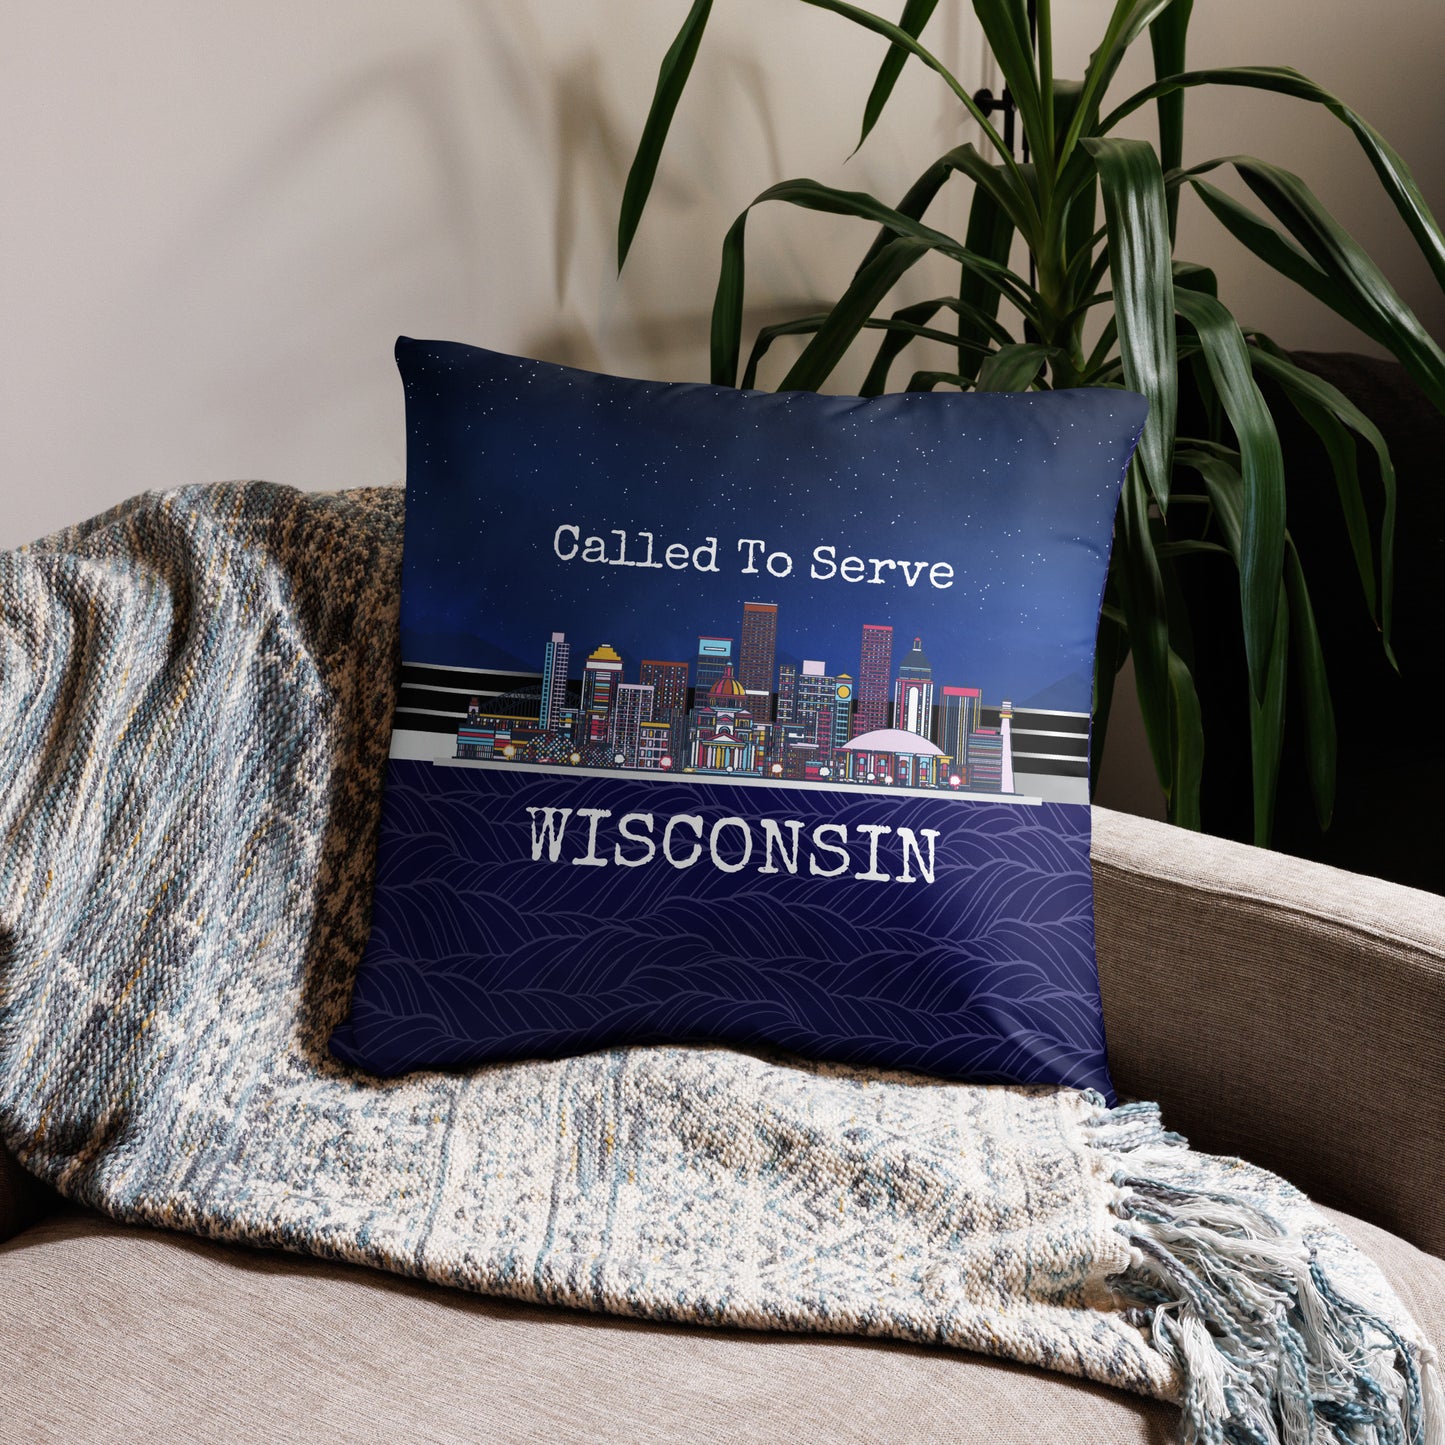 Wisconsin Missionary Gift | Best Missionary Gift Ideas | Mission Call Gifts | Called to Serve Gifts | Missionary Mom Gifts | Best Latter Day Saint Gifts | LDS Missionary Gifts | Wisconsin Home Decor